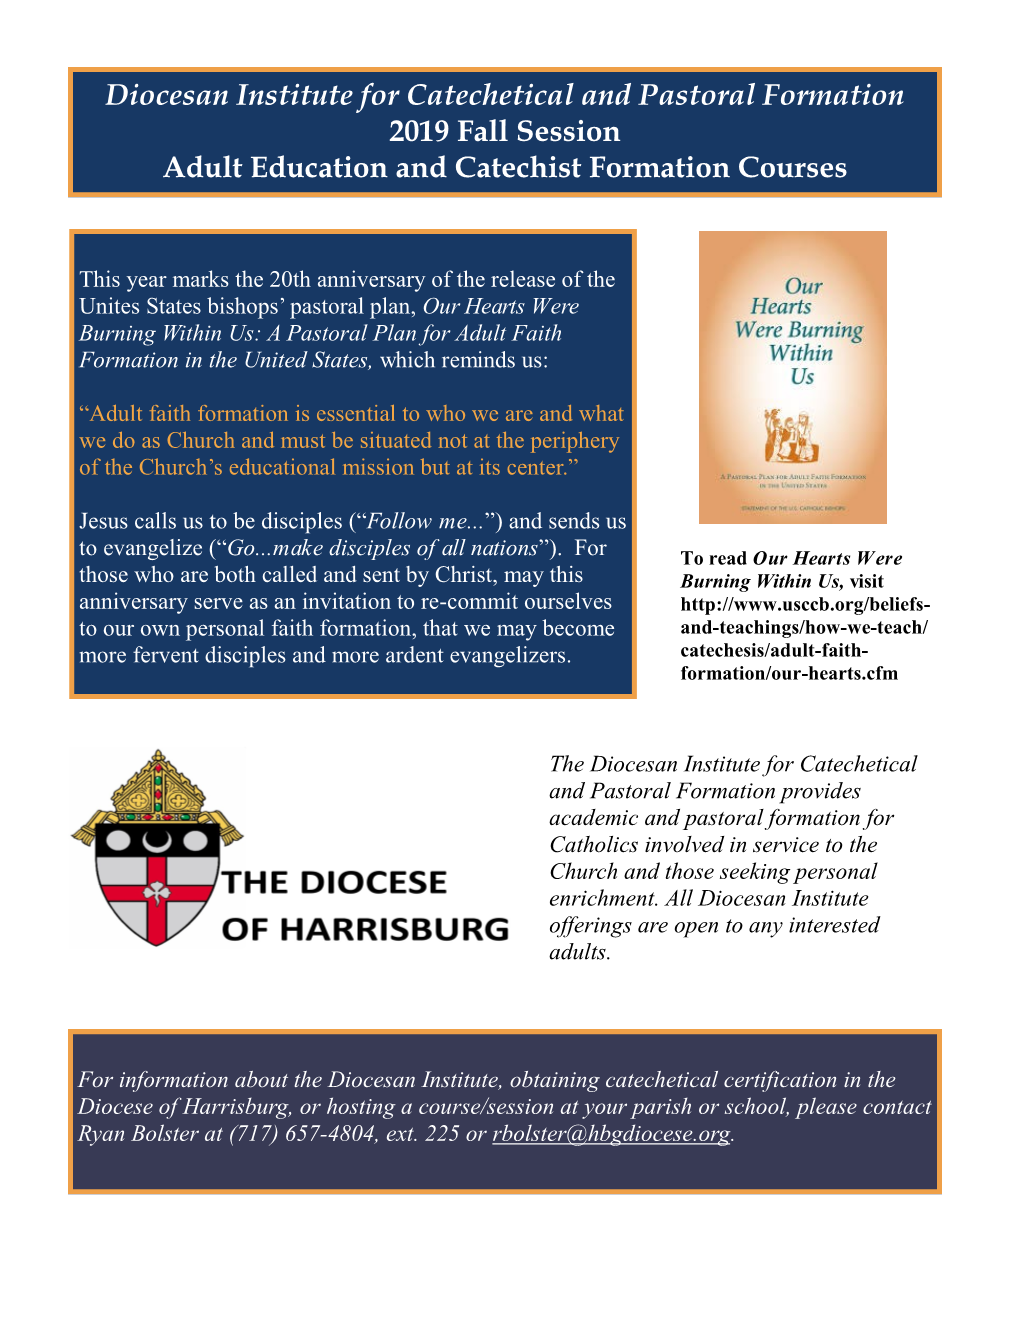 Diocesan Institute for Catechetical and Pastoral Formation 2019 Fall Session Adult Education and Catechist Formation Courses